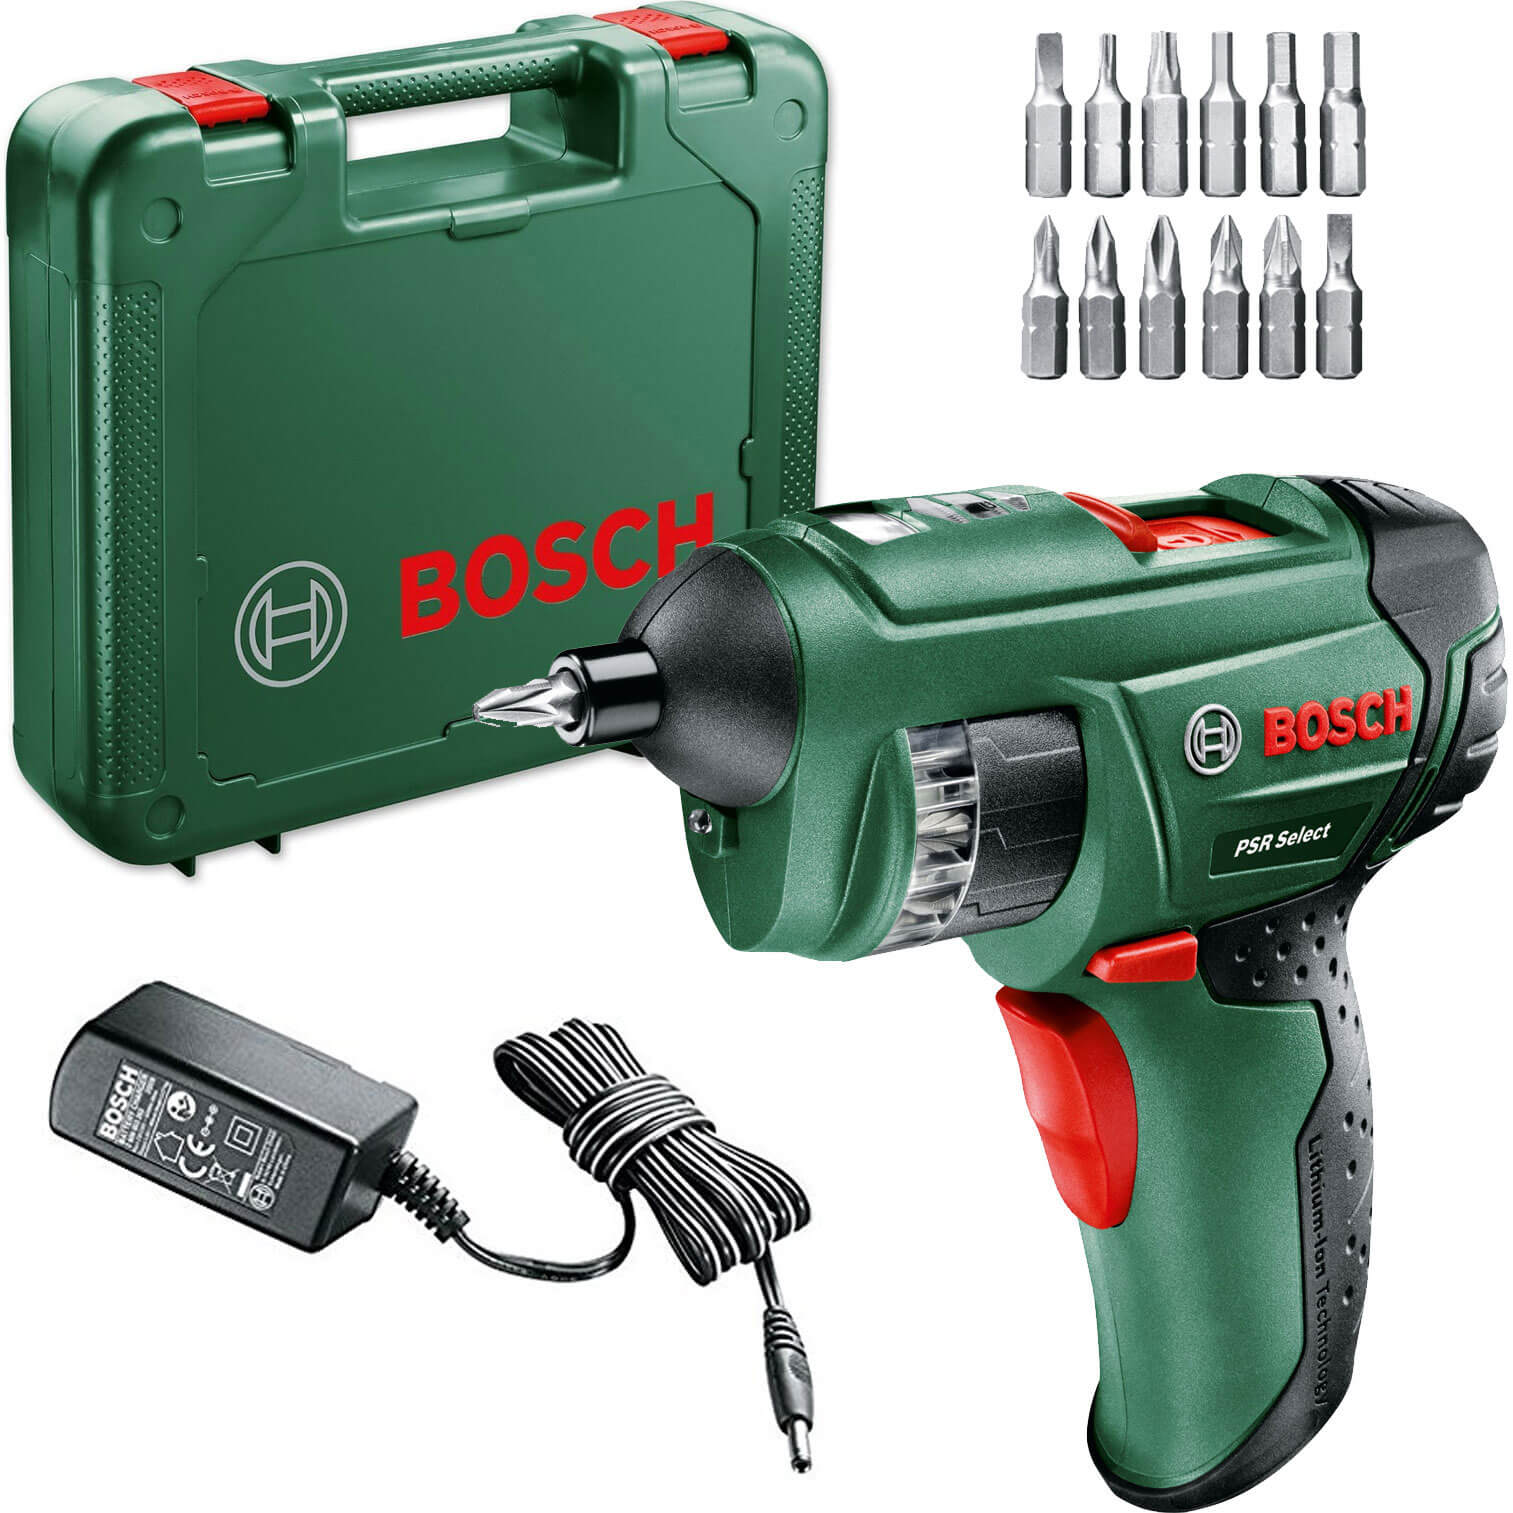 Bosch PSR SELECT 3.6v Cordless Screwdriver with Integral Lithium Ion Battery + 12 Bits